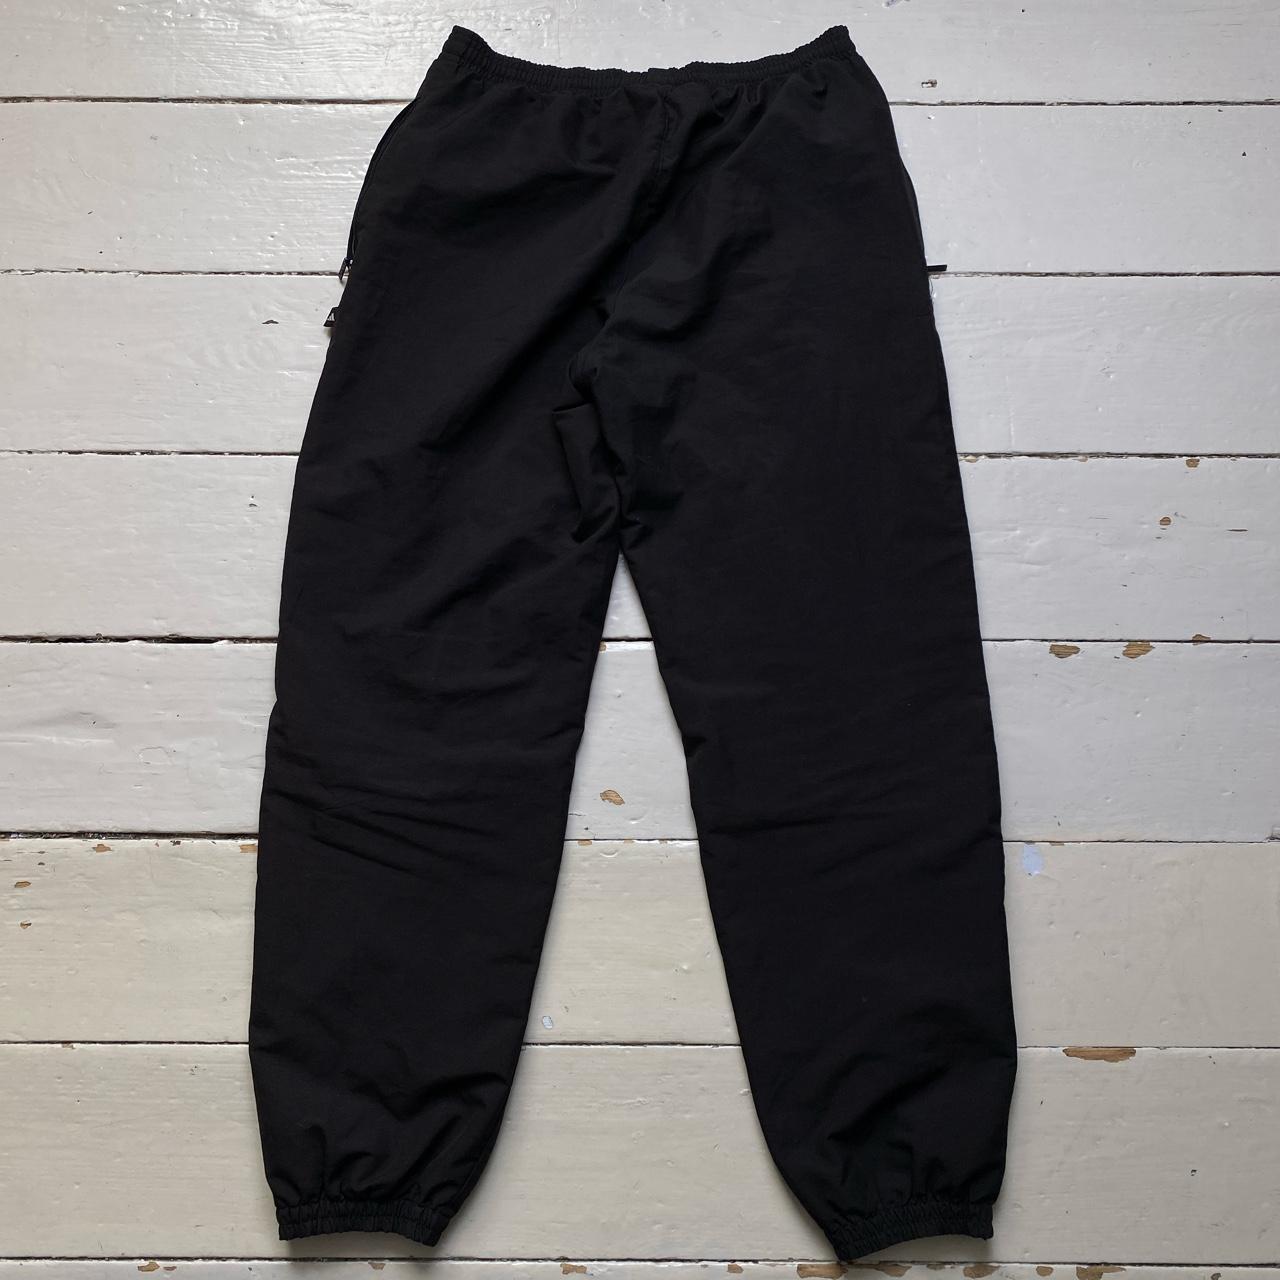 Adidas Baggy Shell Track Pant Black and White Bottoms